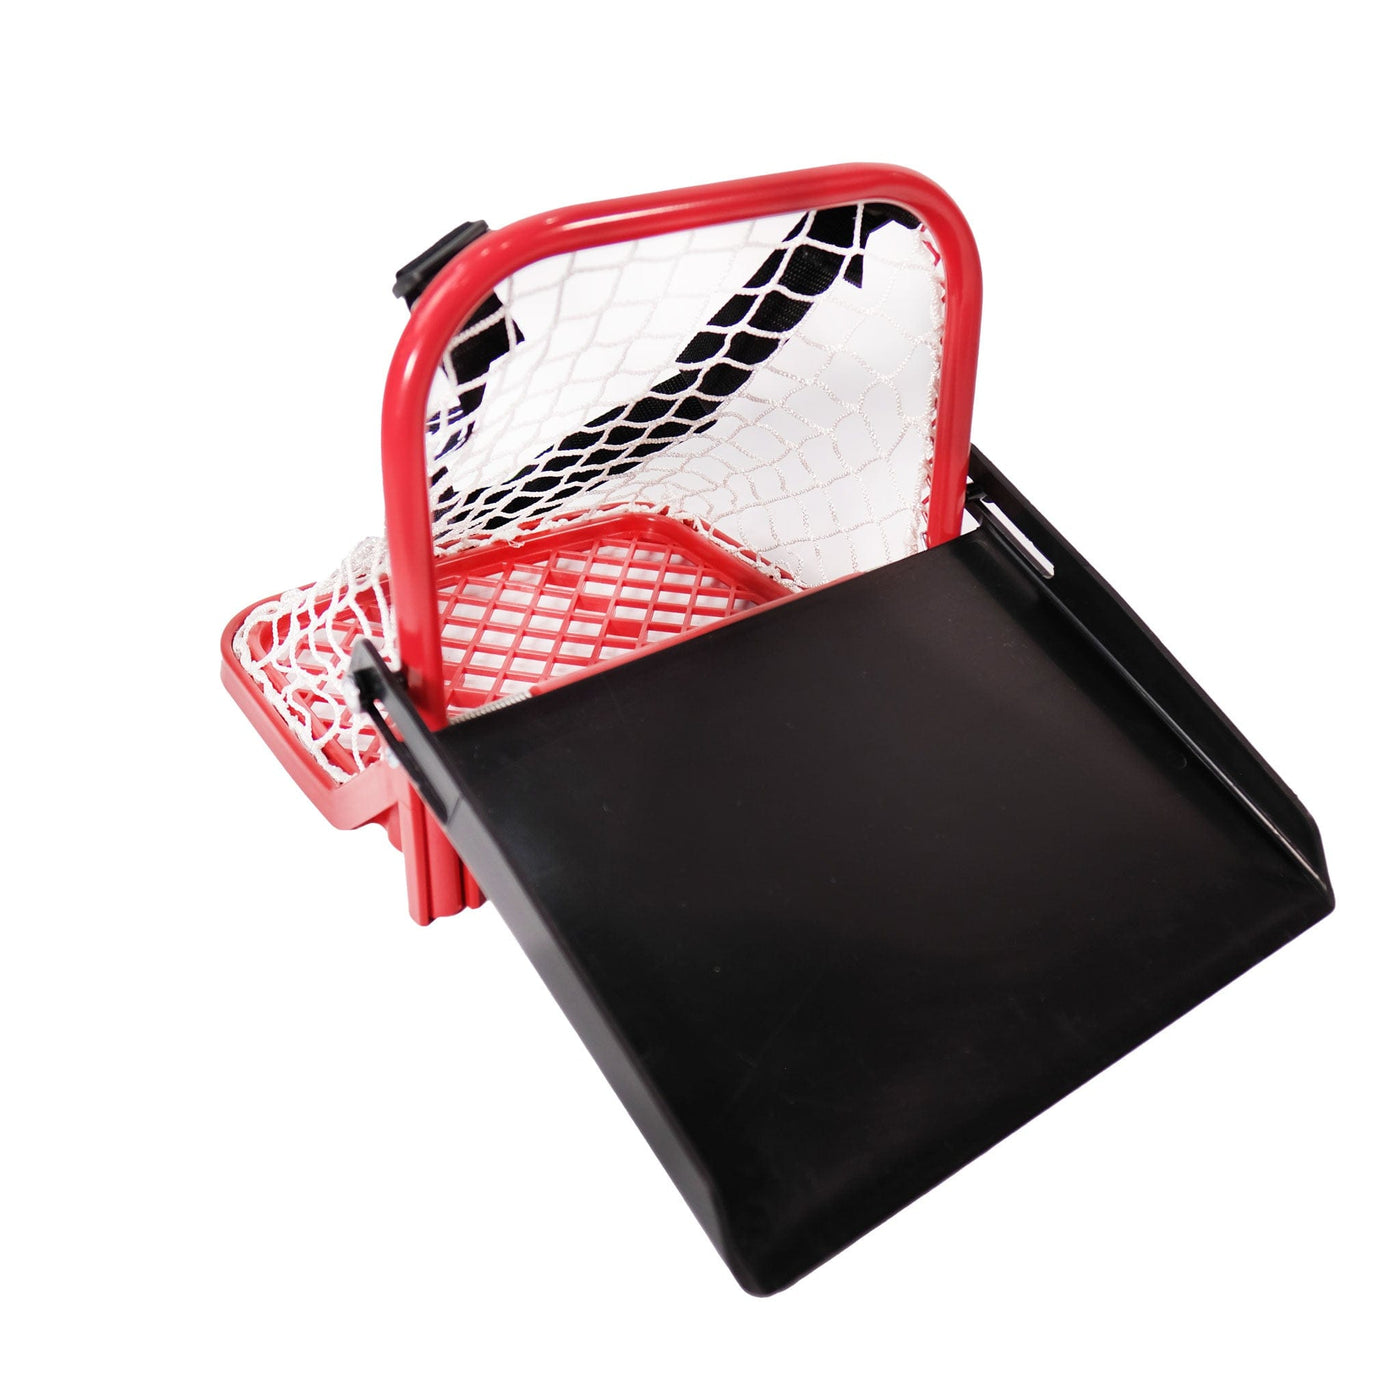 Puck Catcher Pro - The Hockey Shop Source For Sports